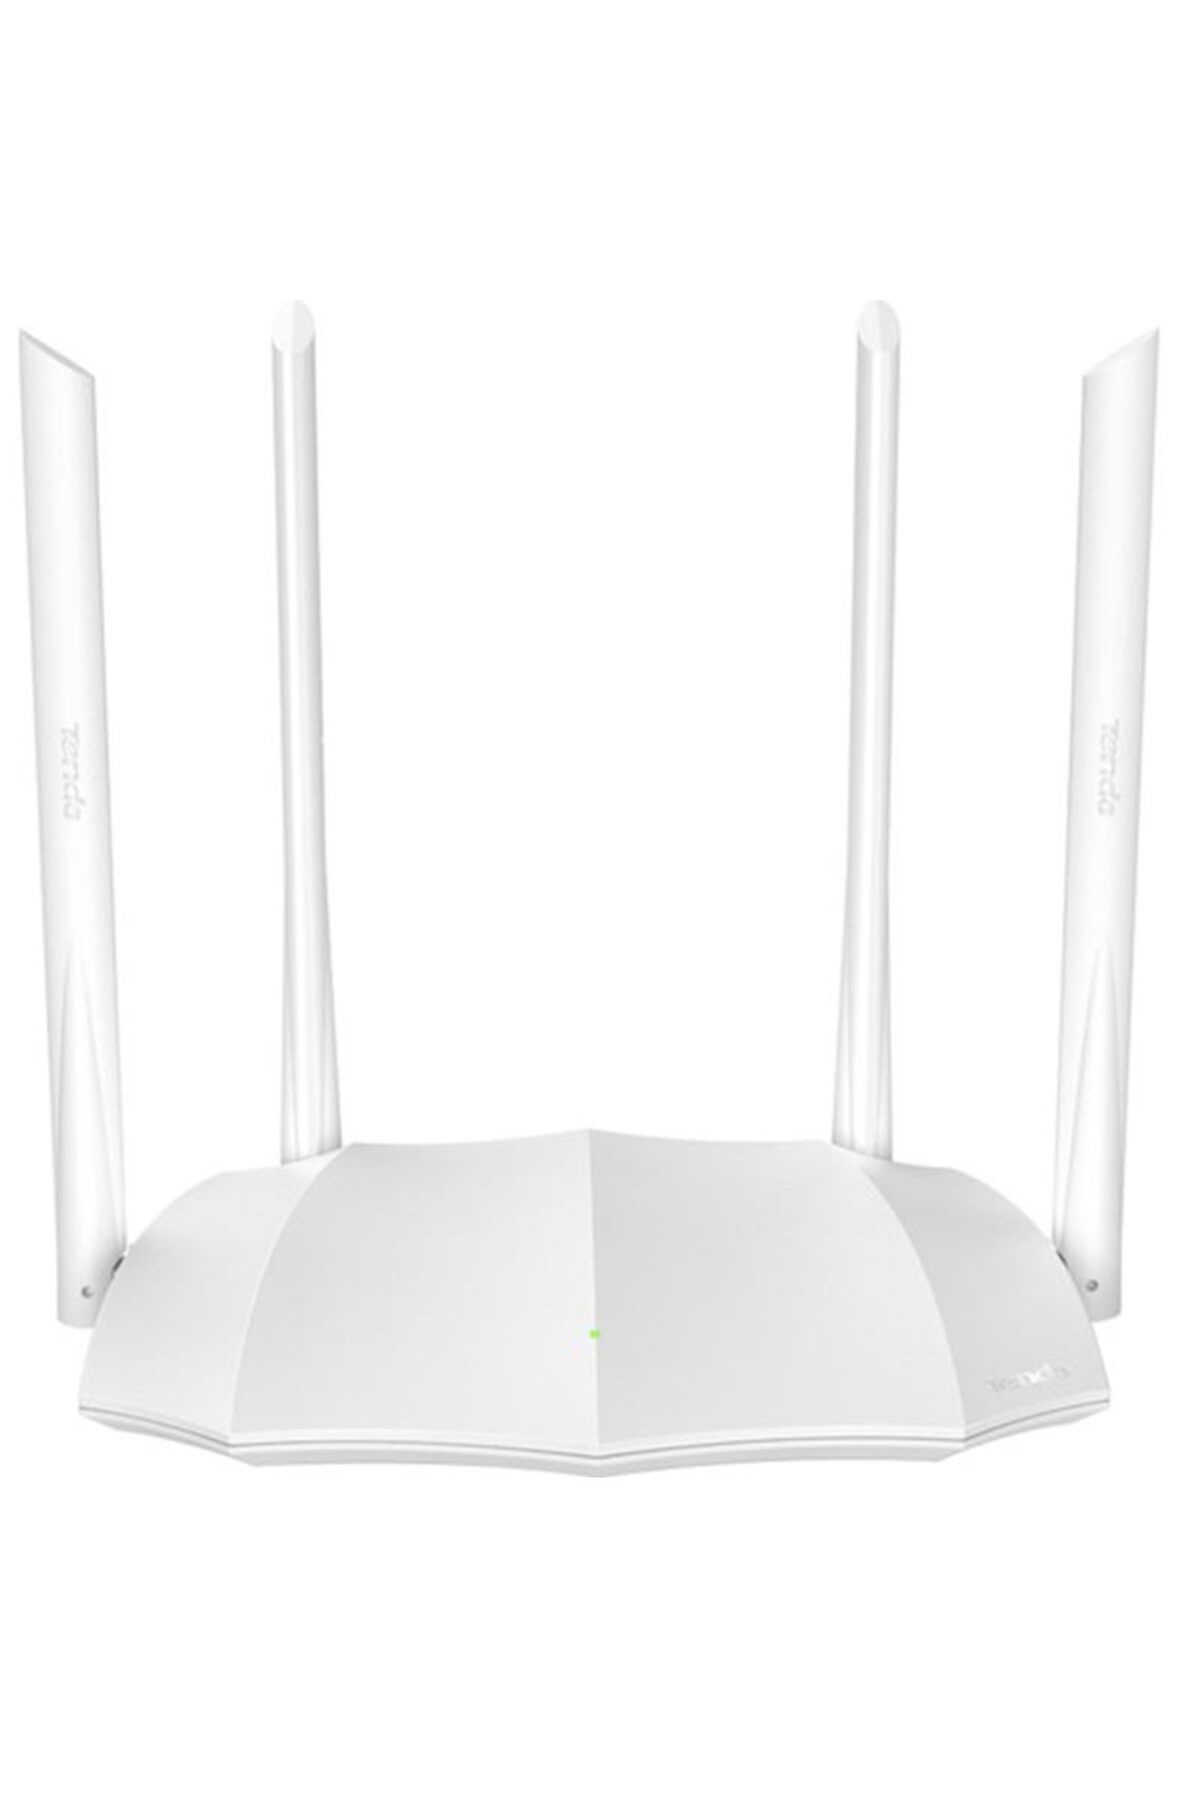 ROSHABA TENDA AC5 1200 MBPS DUAL-BAND 4 PORT WIFI ROUTER+ACCESS POINT